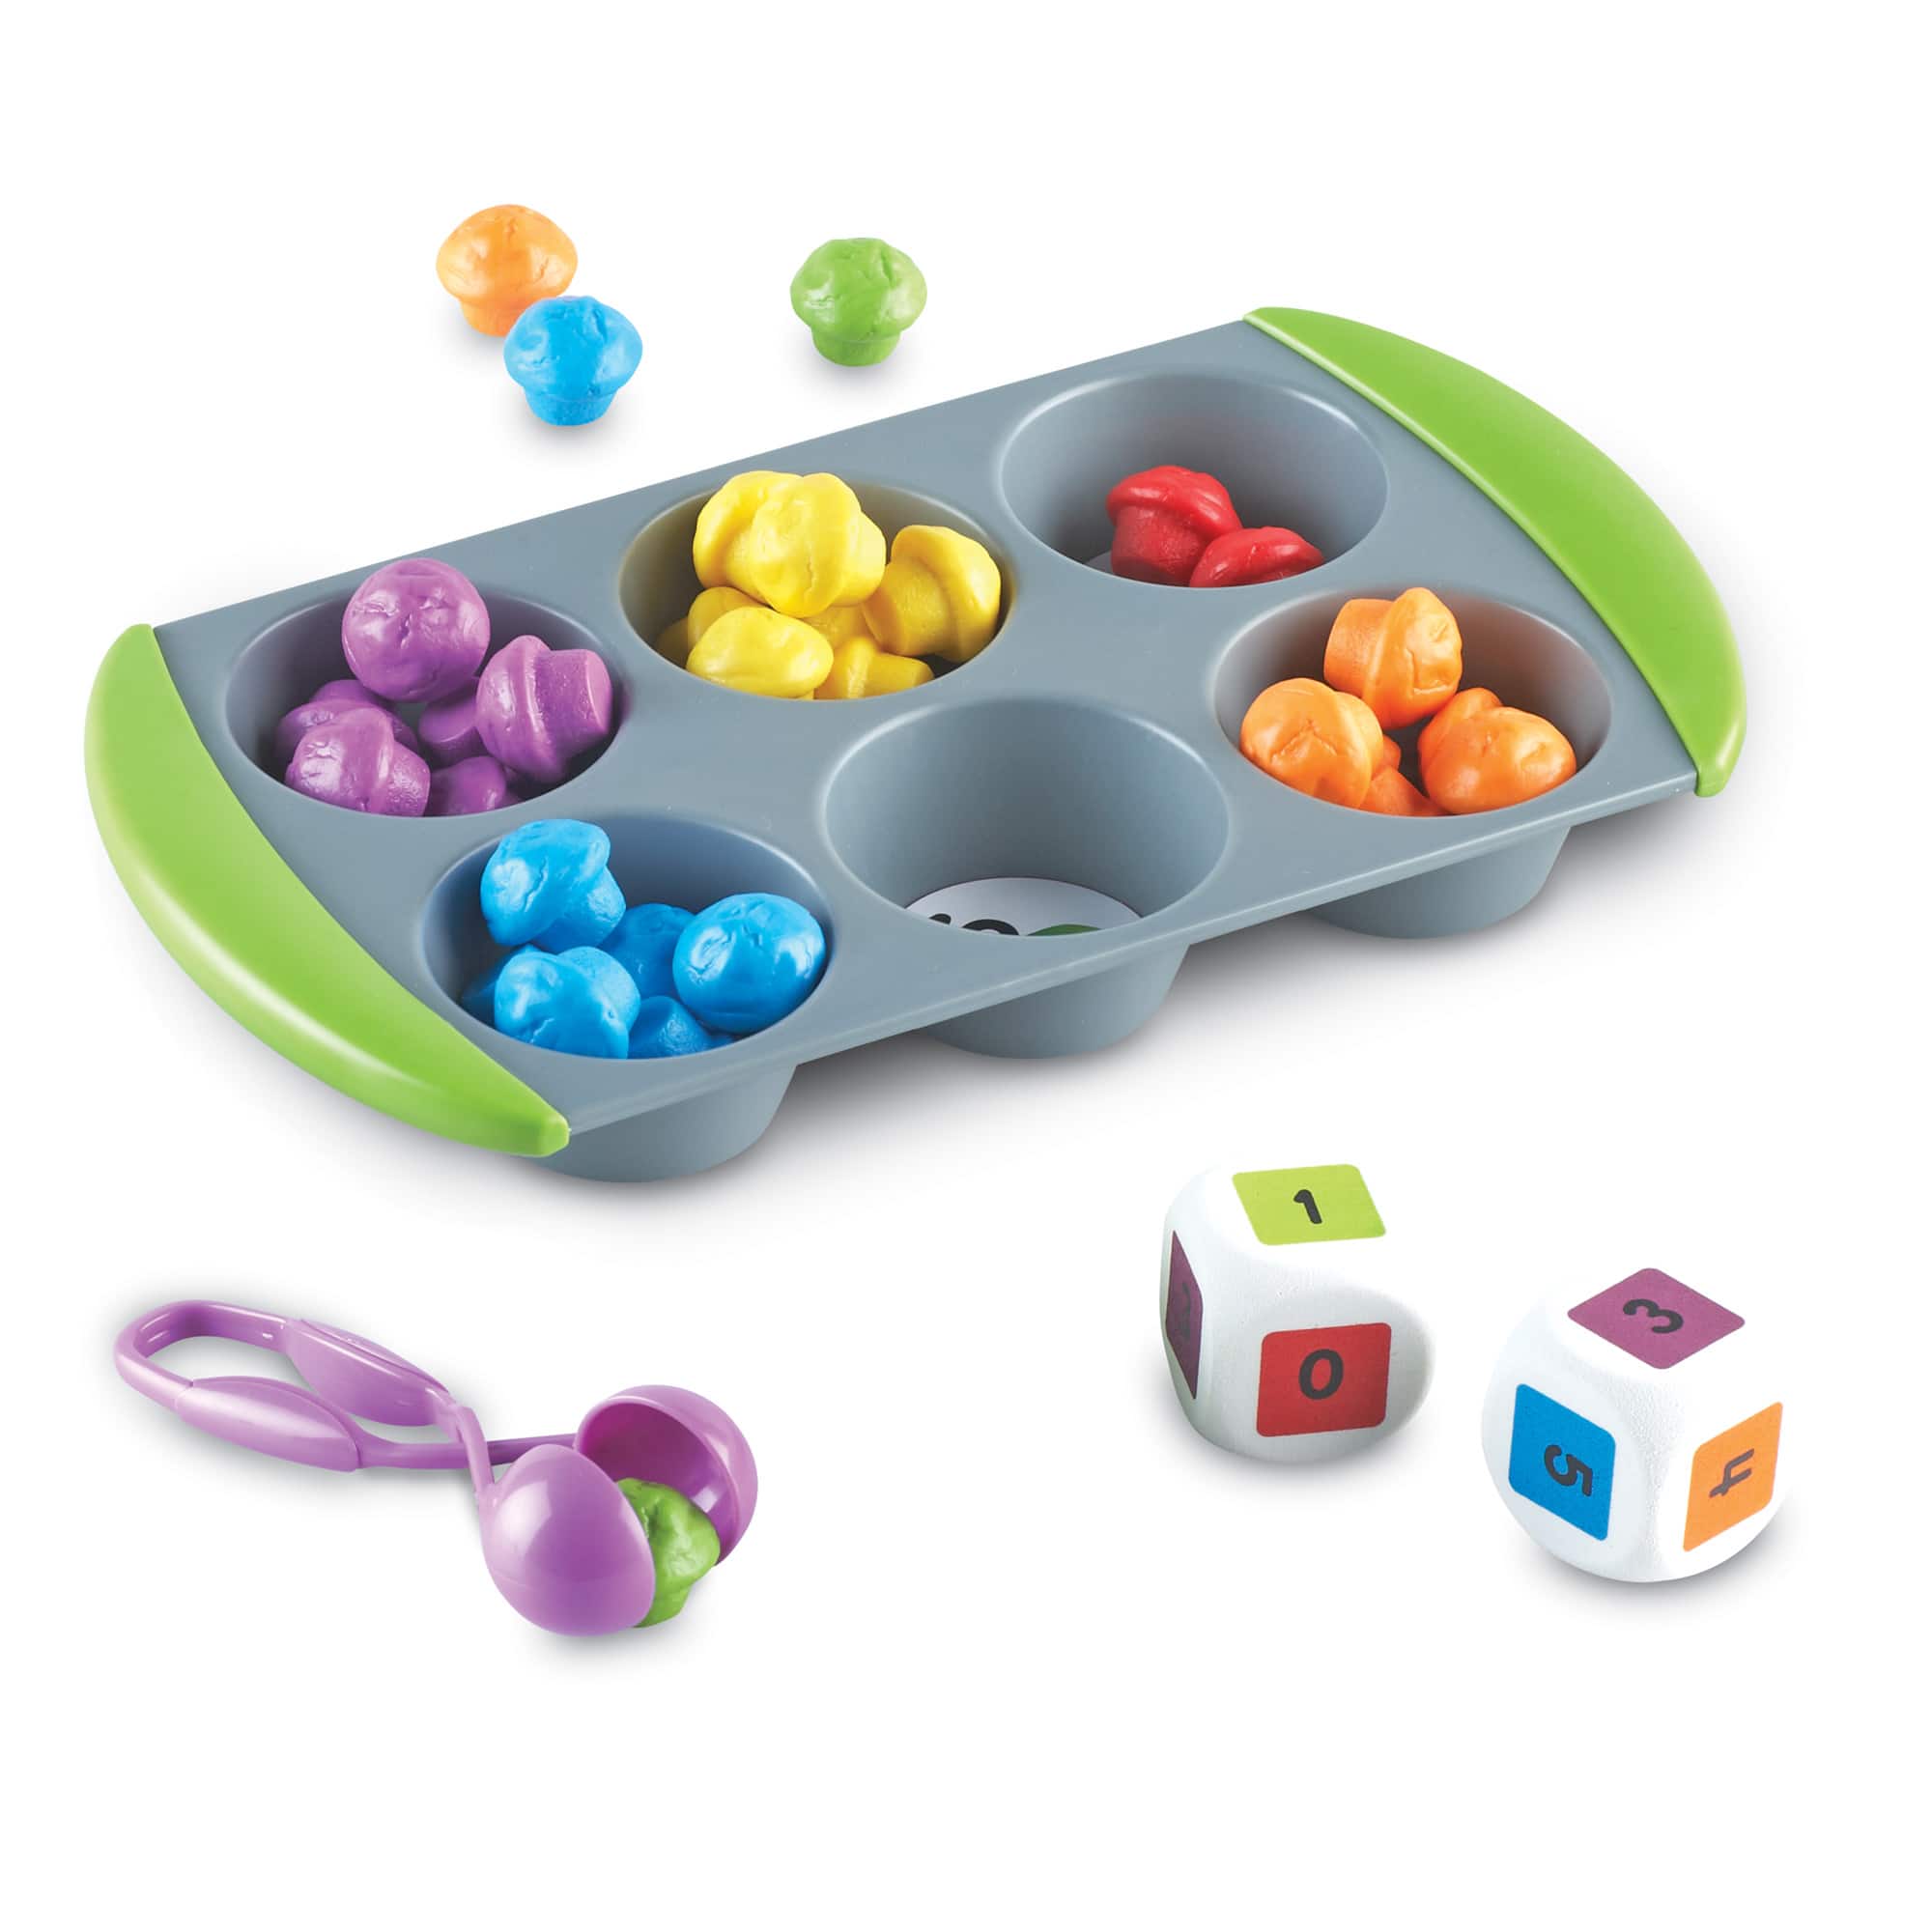 standart Learning Resources Mini Muffin Match Up Counting Toy Set, 